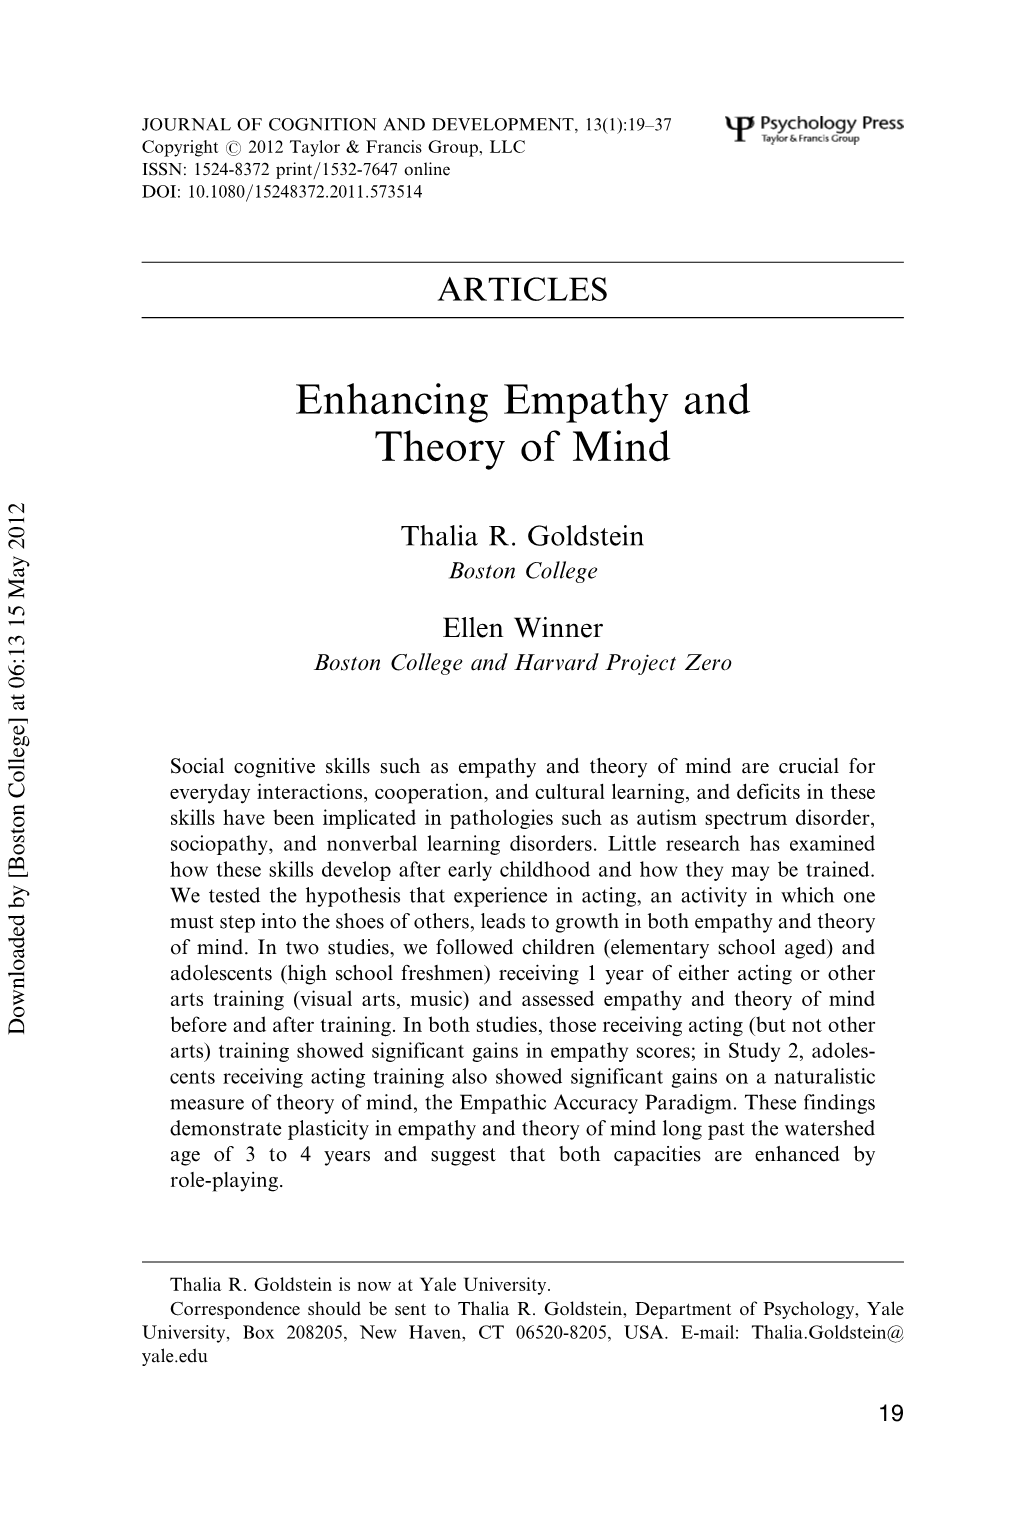 Enhancing Empathy and Theory of Mind